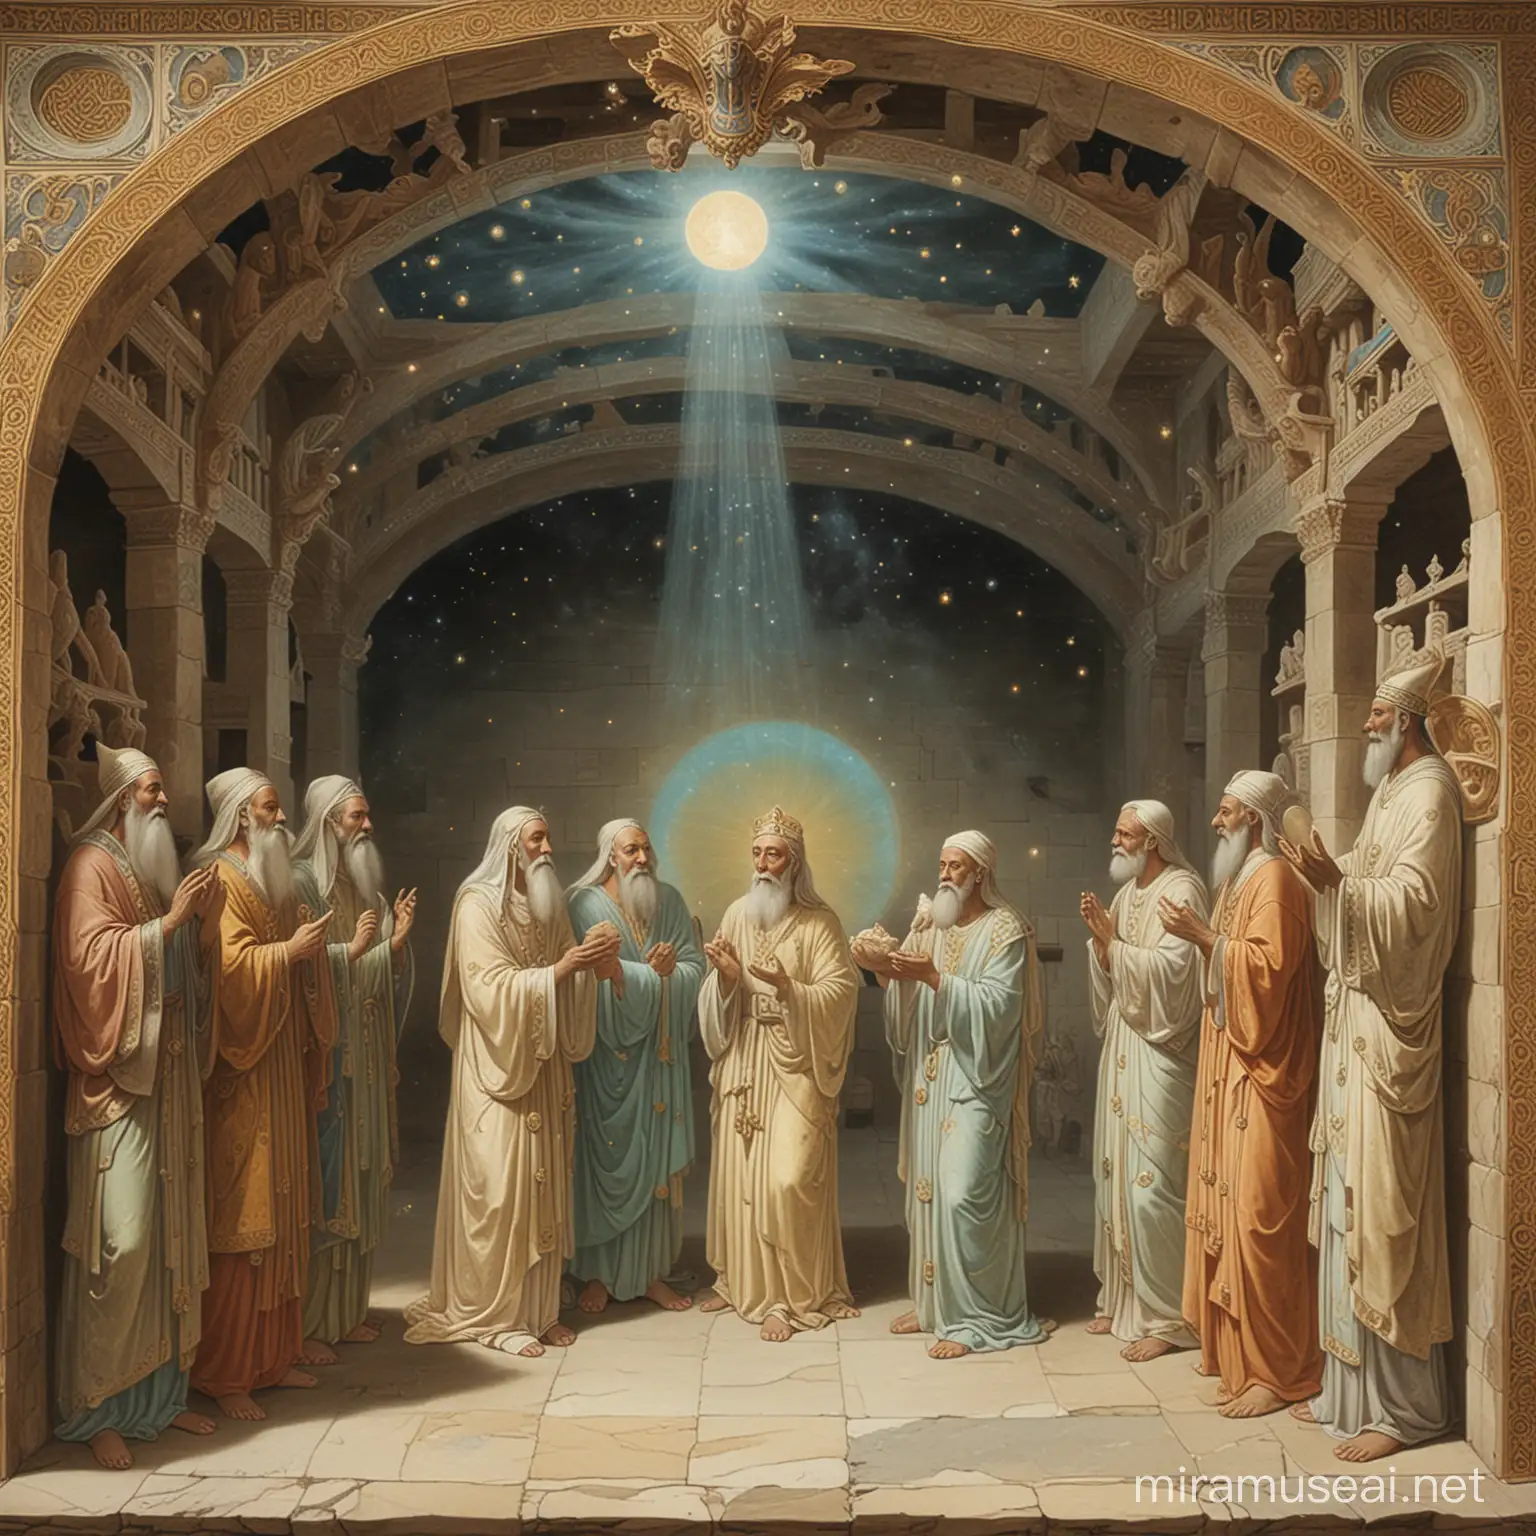 Elders Holding a Baby in the Radiant Chambers of the Celestial Court